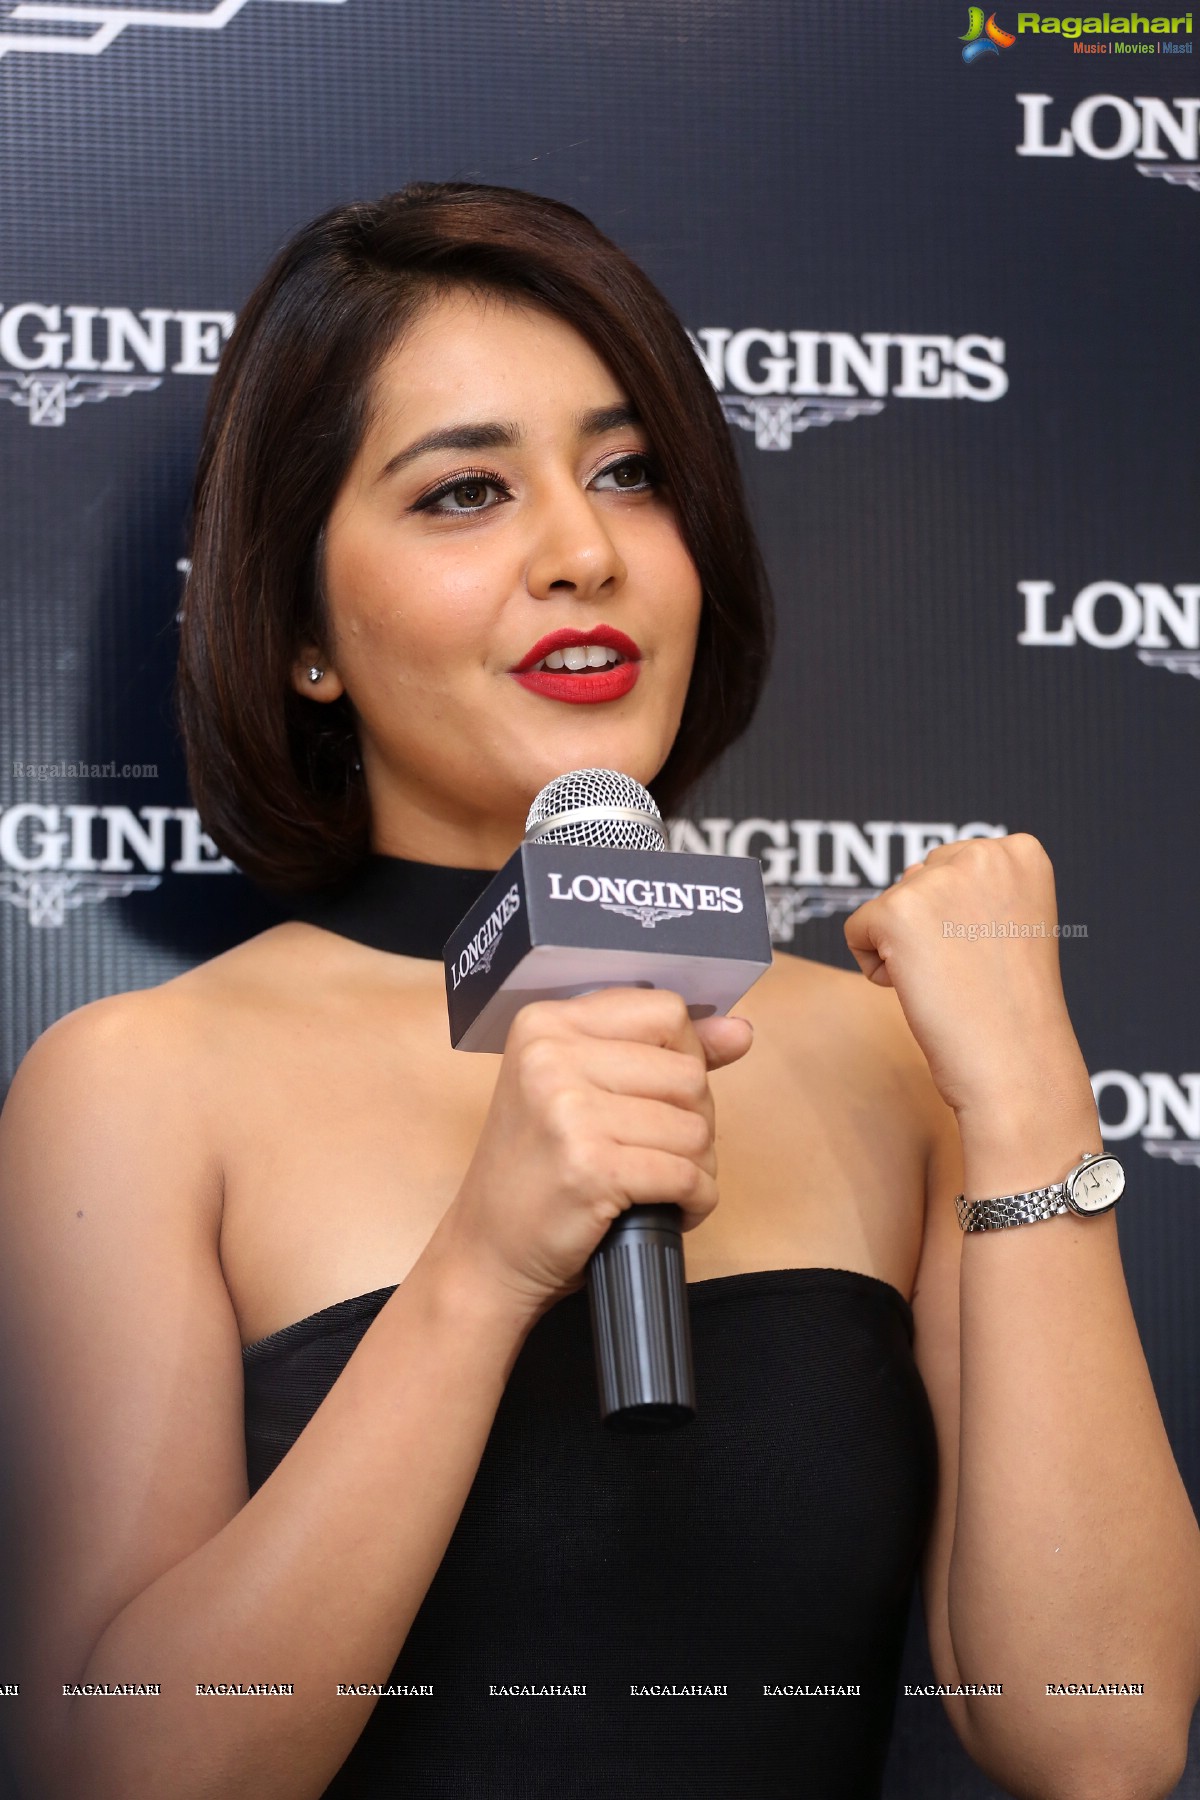 Longines launches its latest Longines Symphonette collection at the Longines Boutique, Jubilee Hills, Hyderabad